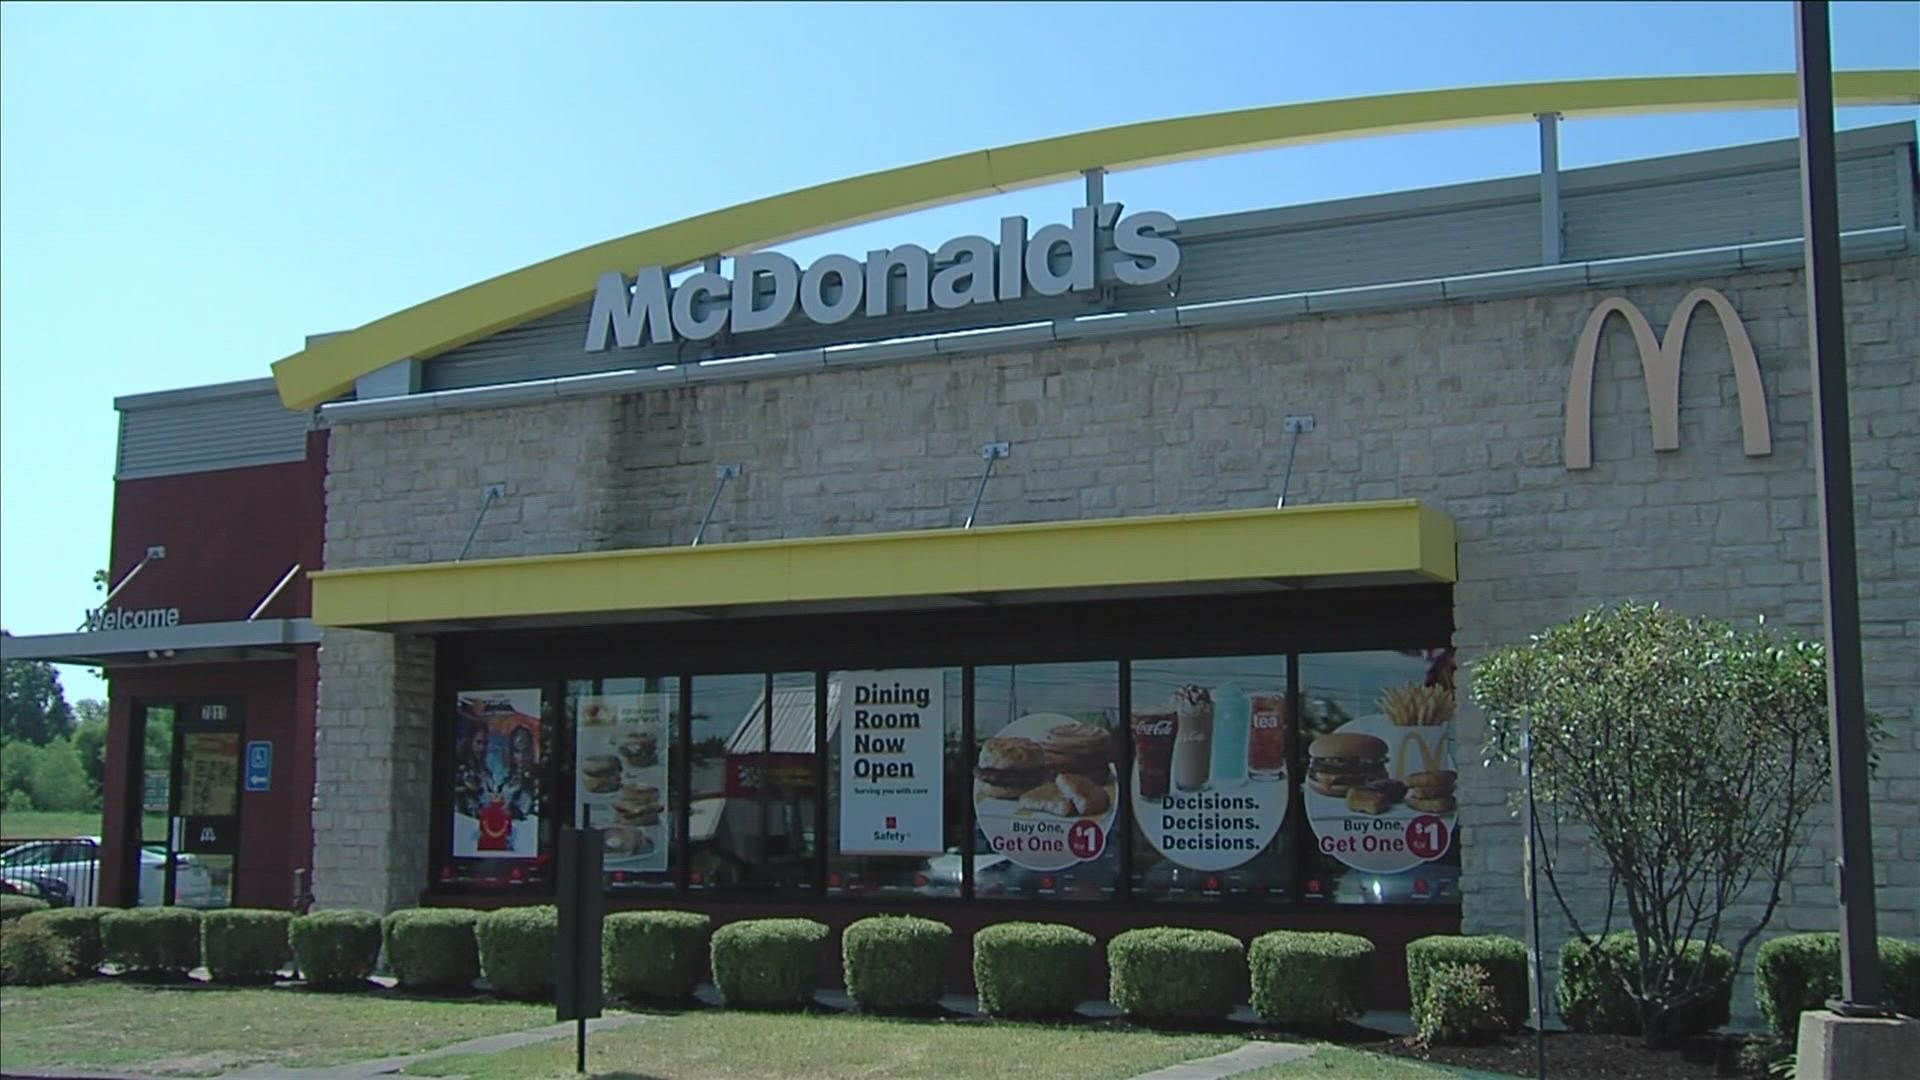 McDonald’s said through the partnership, youth can develop professional and training skills.